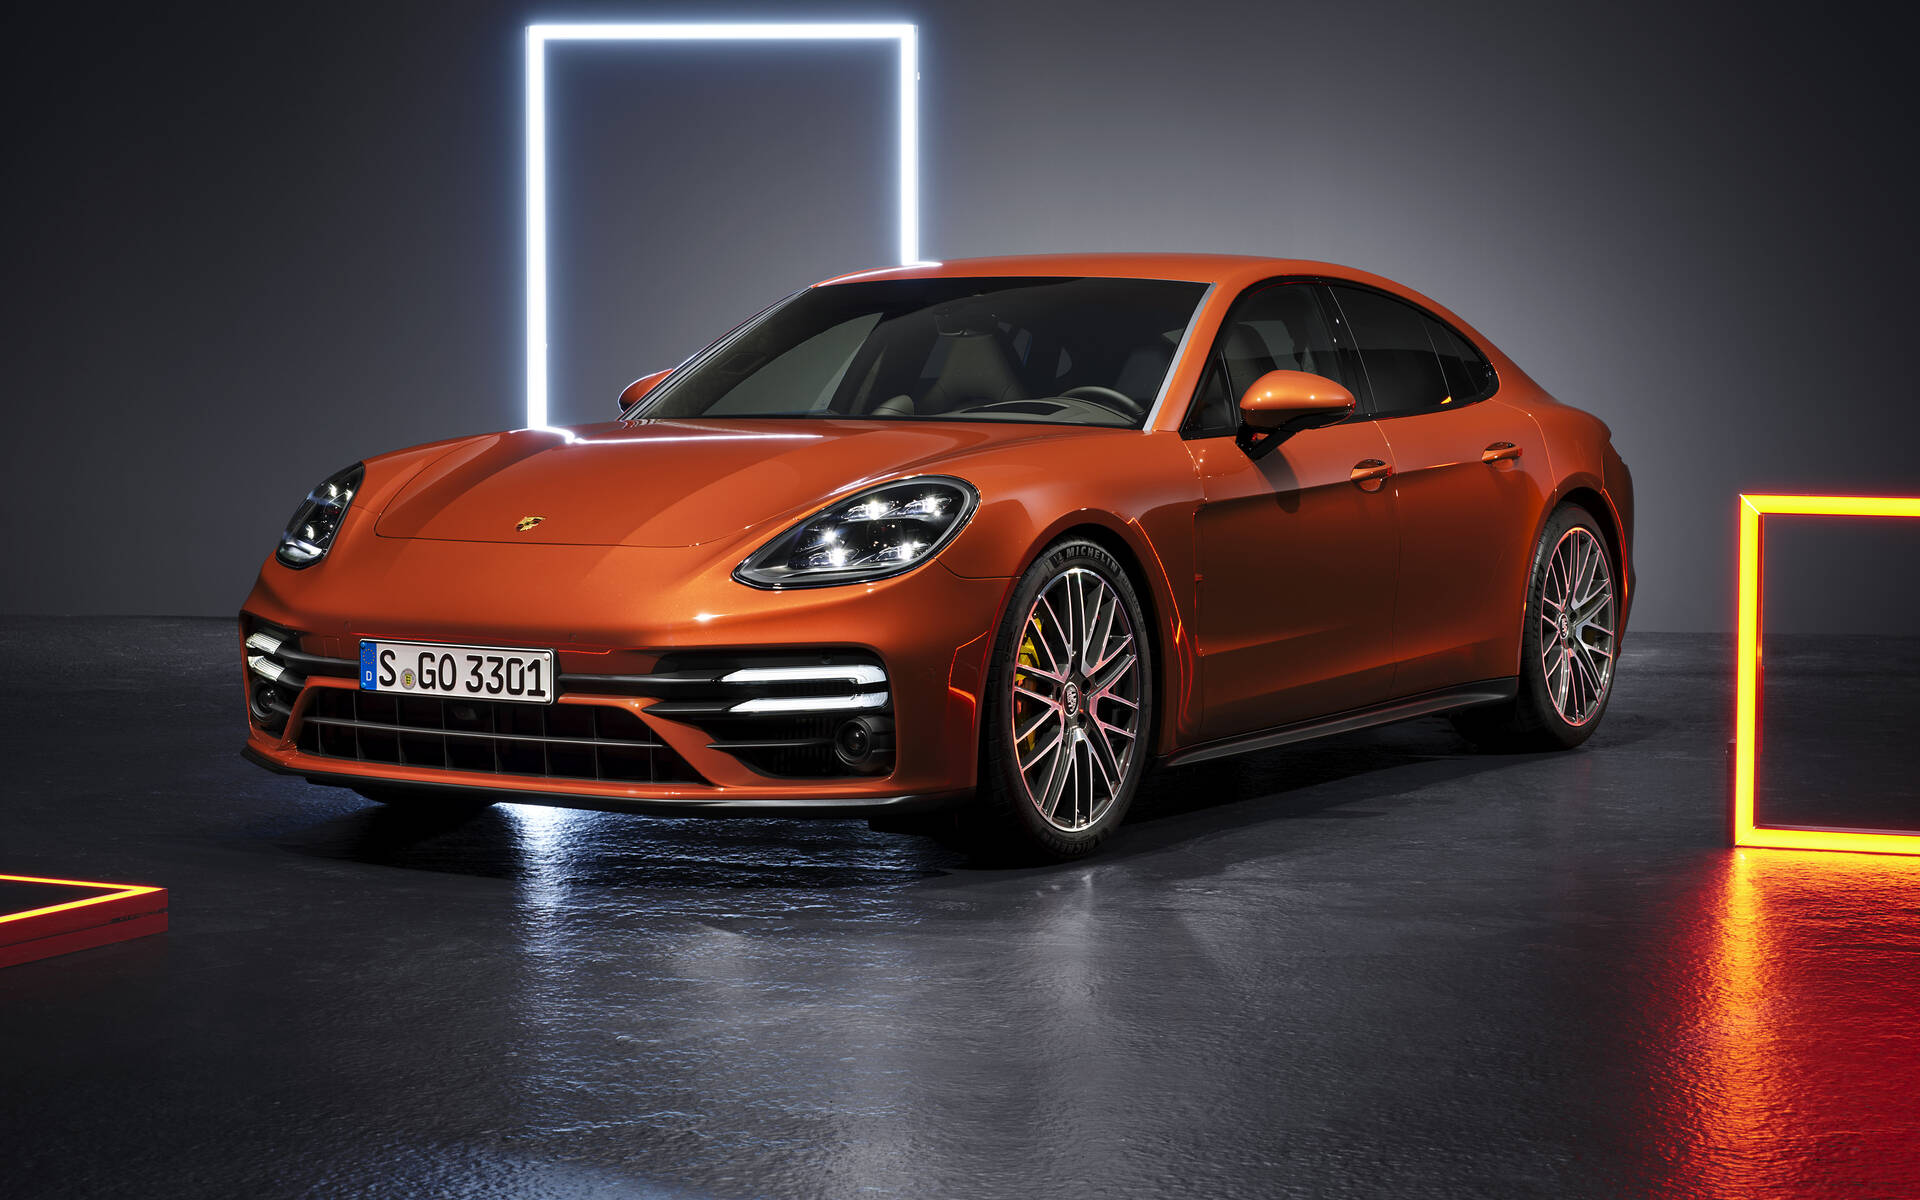 2022 Porsche Panamera - News, reviews, picture galleries and